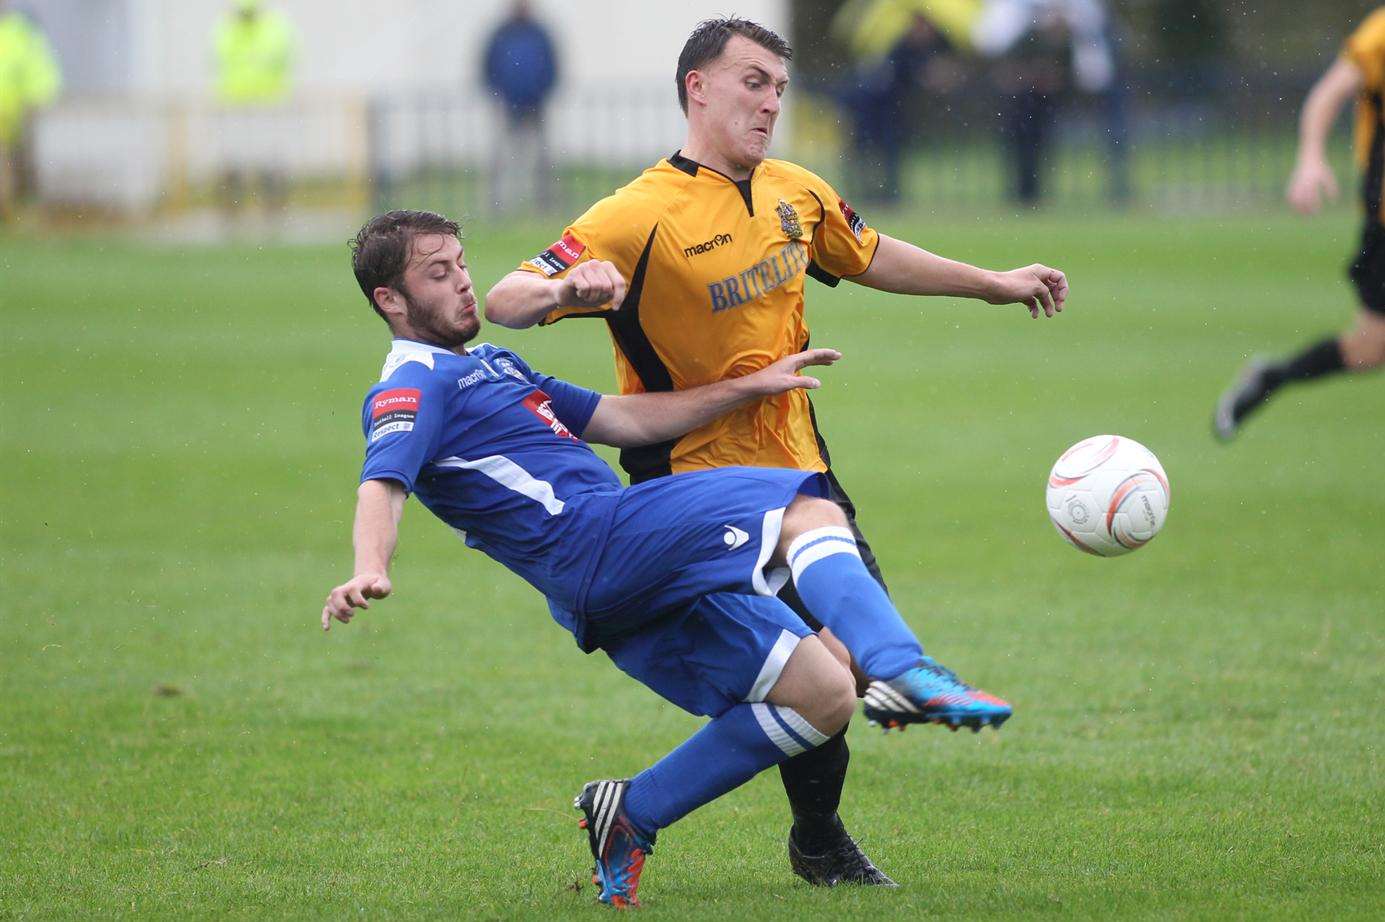 Local rivals Tonbridge and Maidstone clash on New Year's Day. The Angles beat the Stones 1-0 earlier this season.